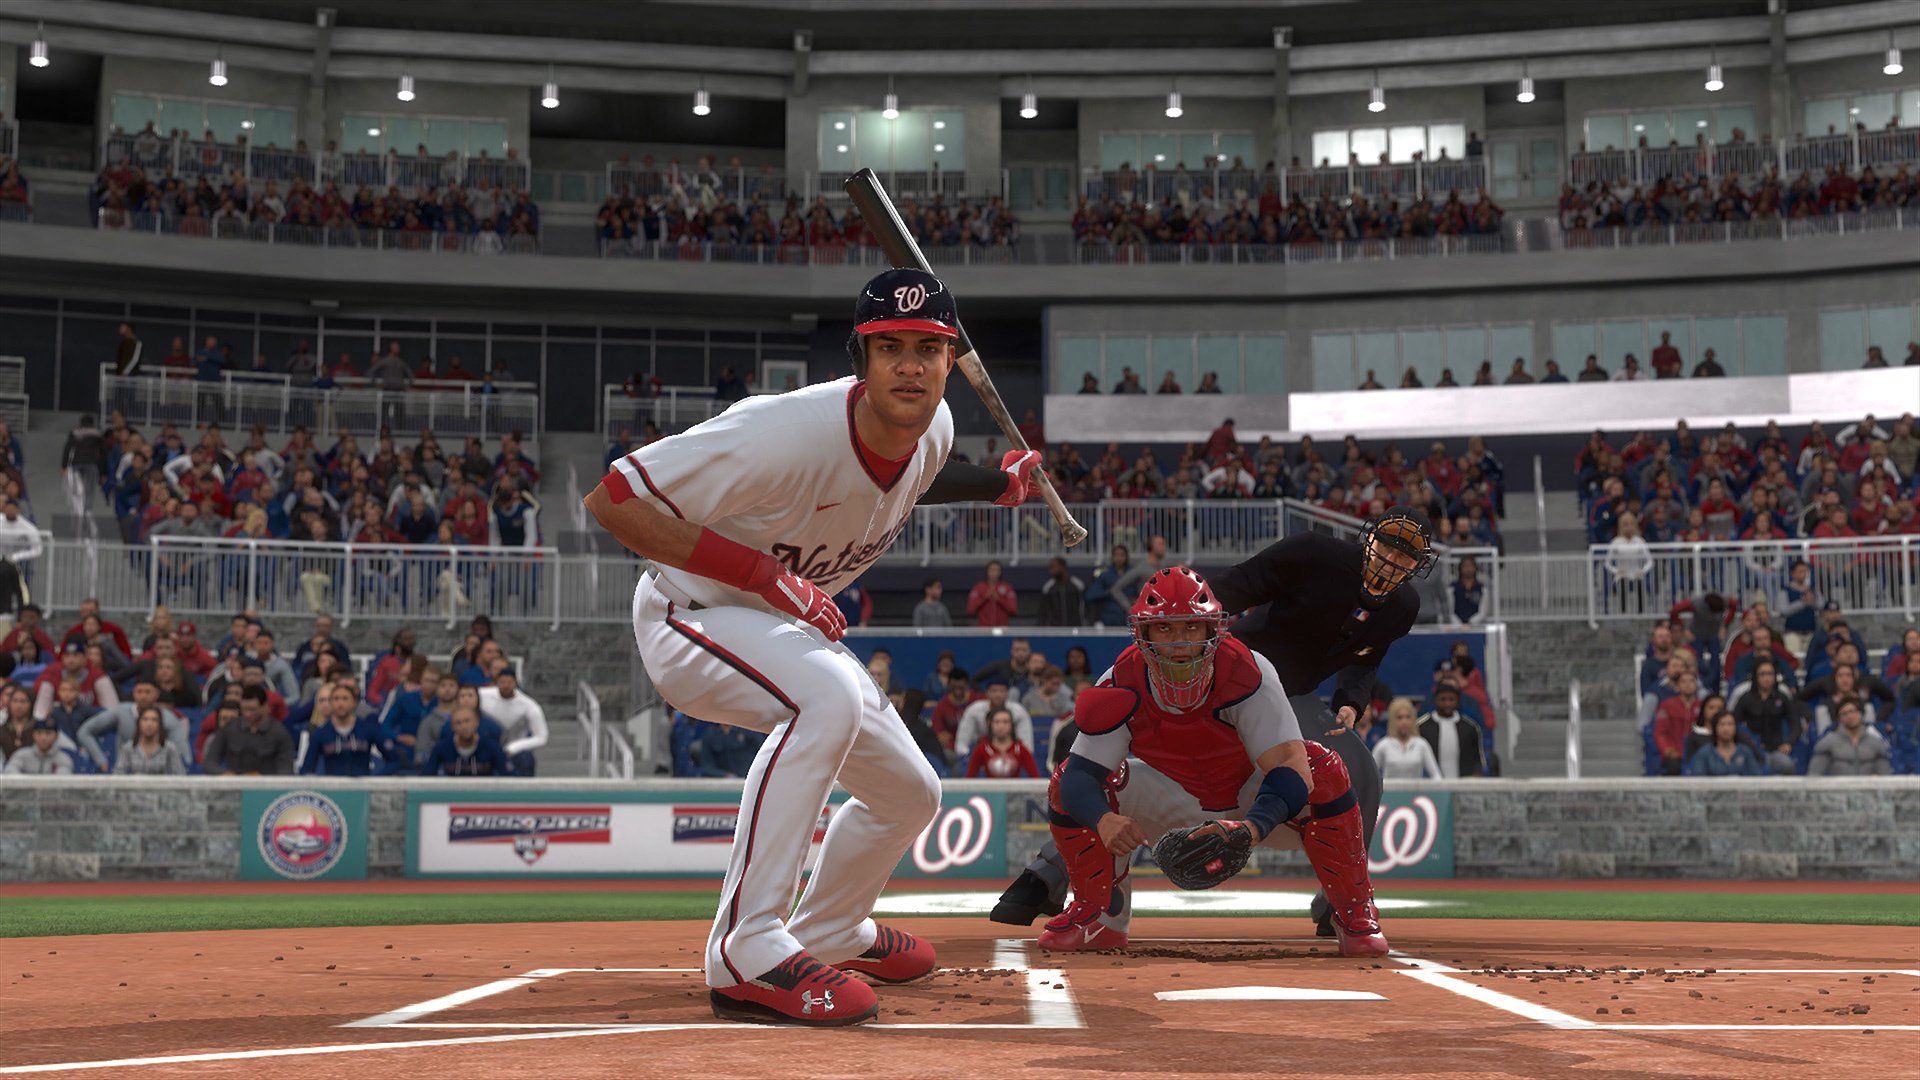 MLB The Show 20 (PS4 / PlayStation 4) Game Profile News, Reviews